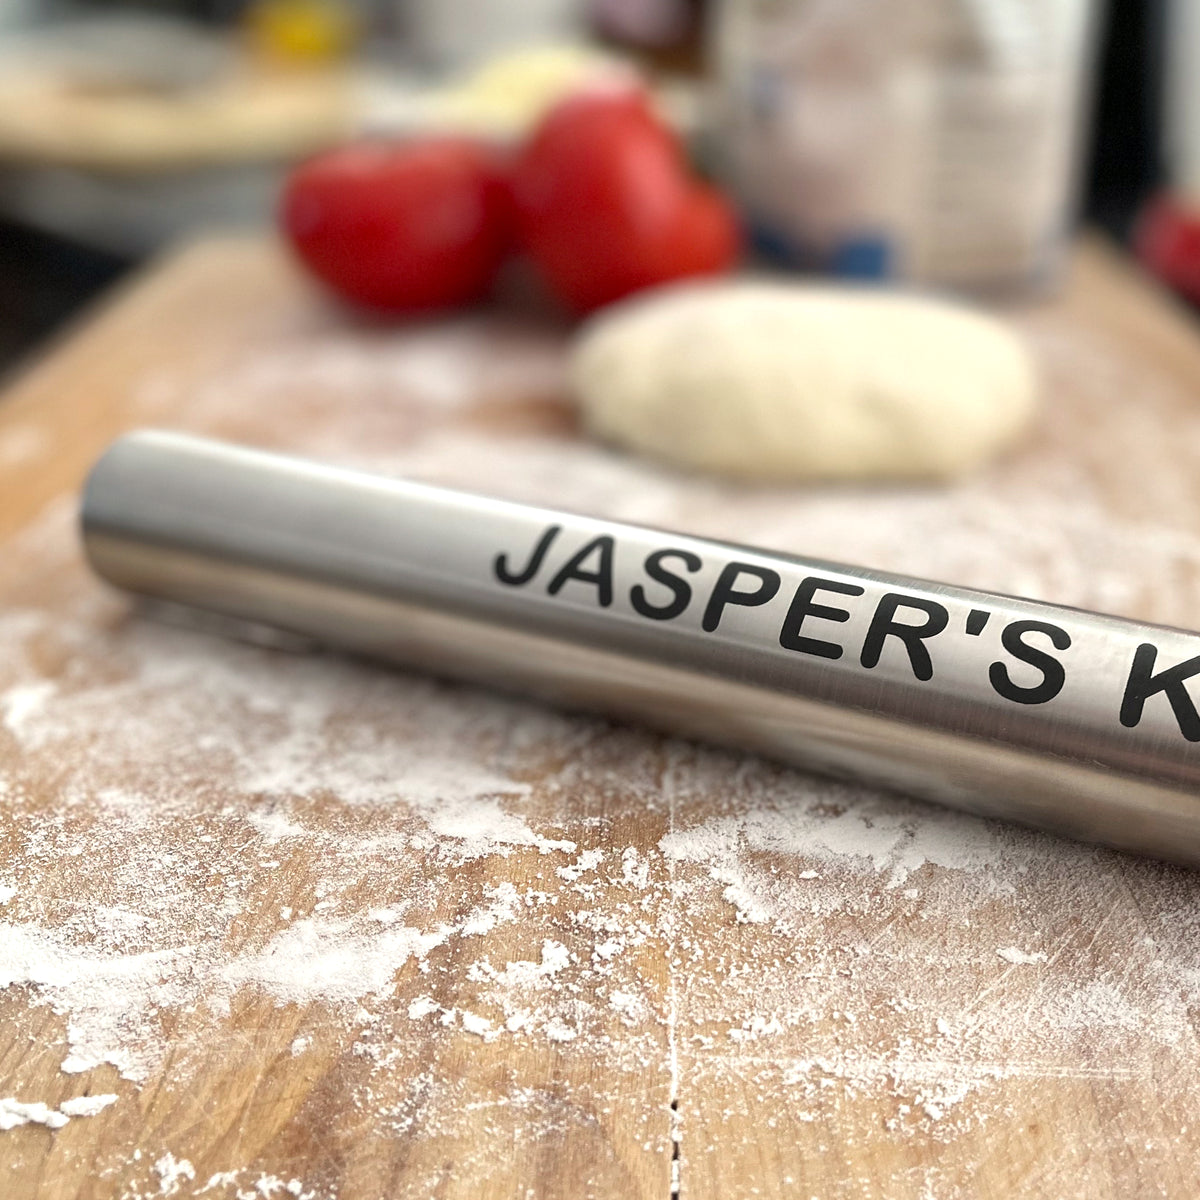 Pizza Rolling Pin - Pasta Rolling Pin - Personalize